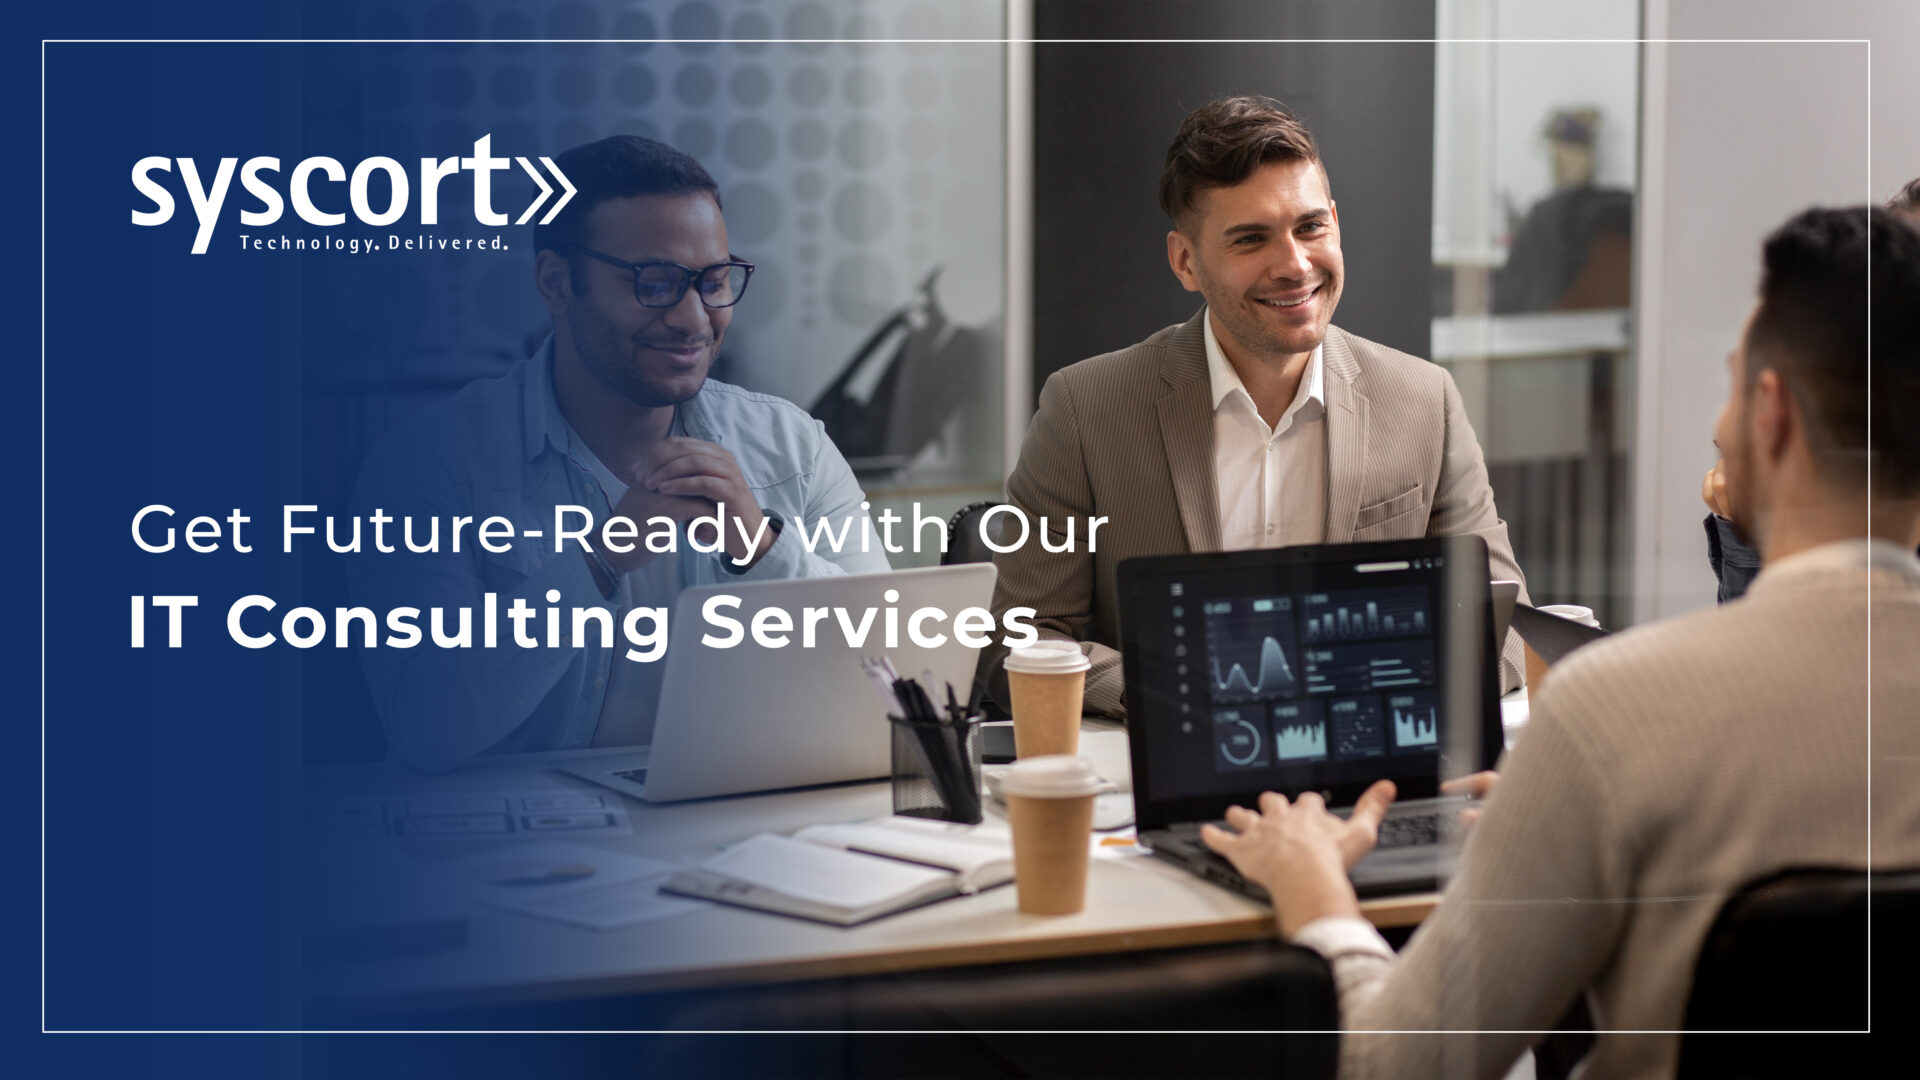 Get Future-Ready with Our IT Consulting Services